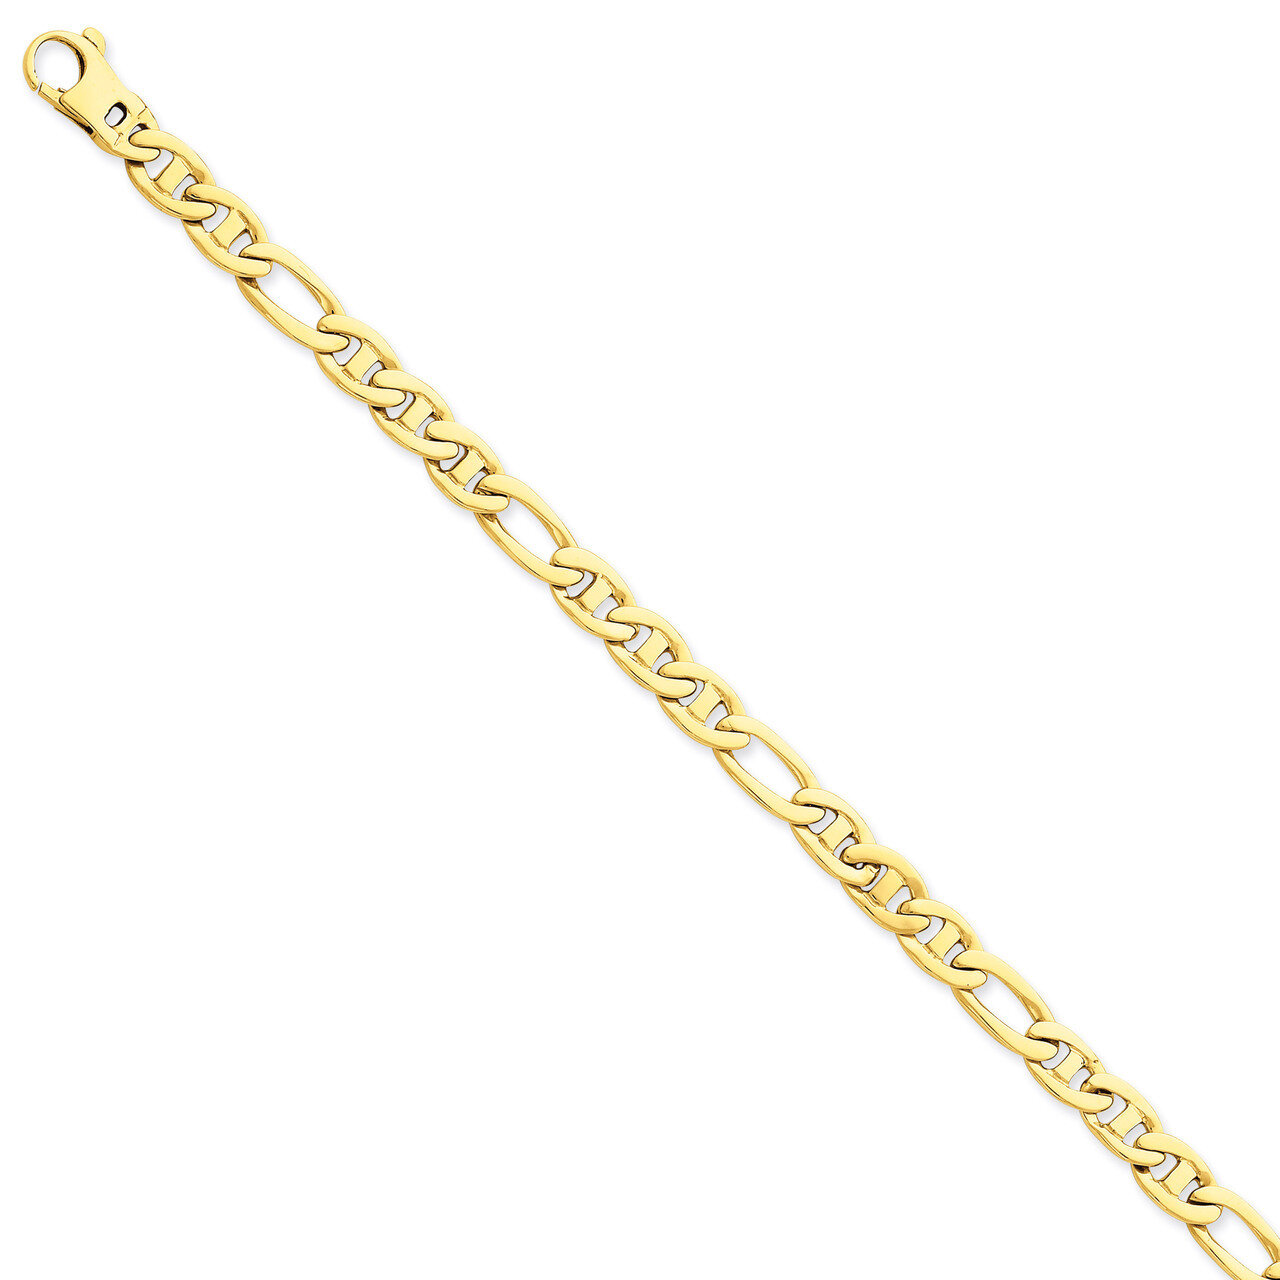 6.5mm Solid Hand-Polished 3 & 1 Flat Anchor Chain 22 Inch 14k Gold FL438-22